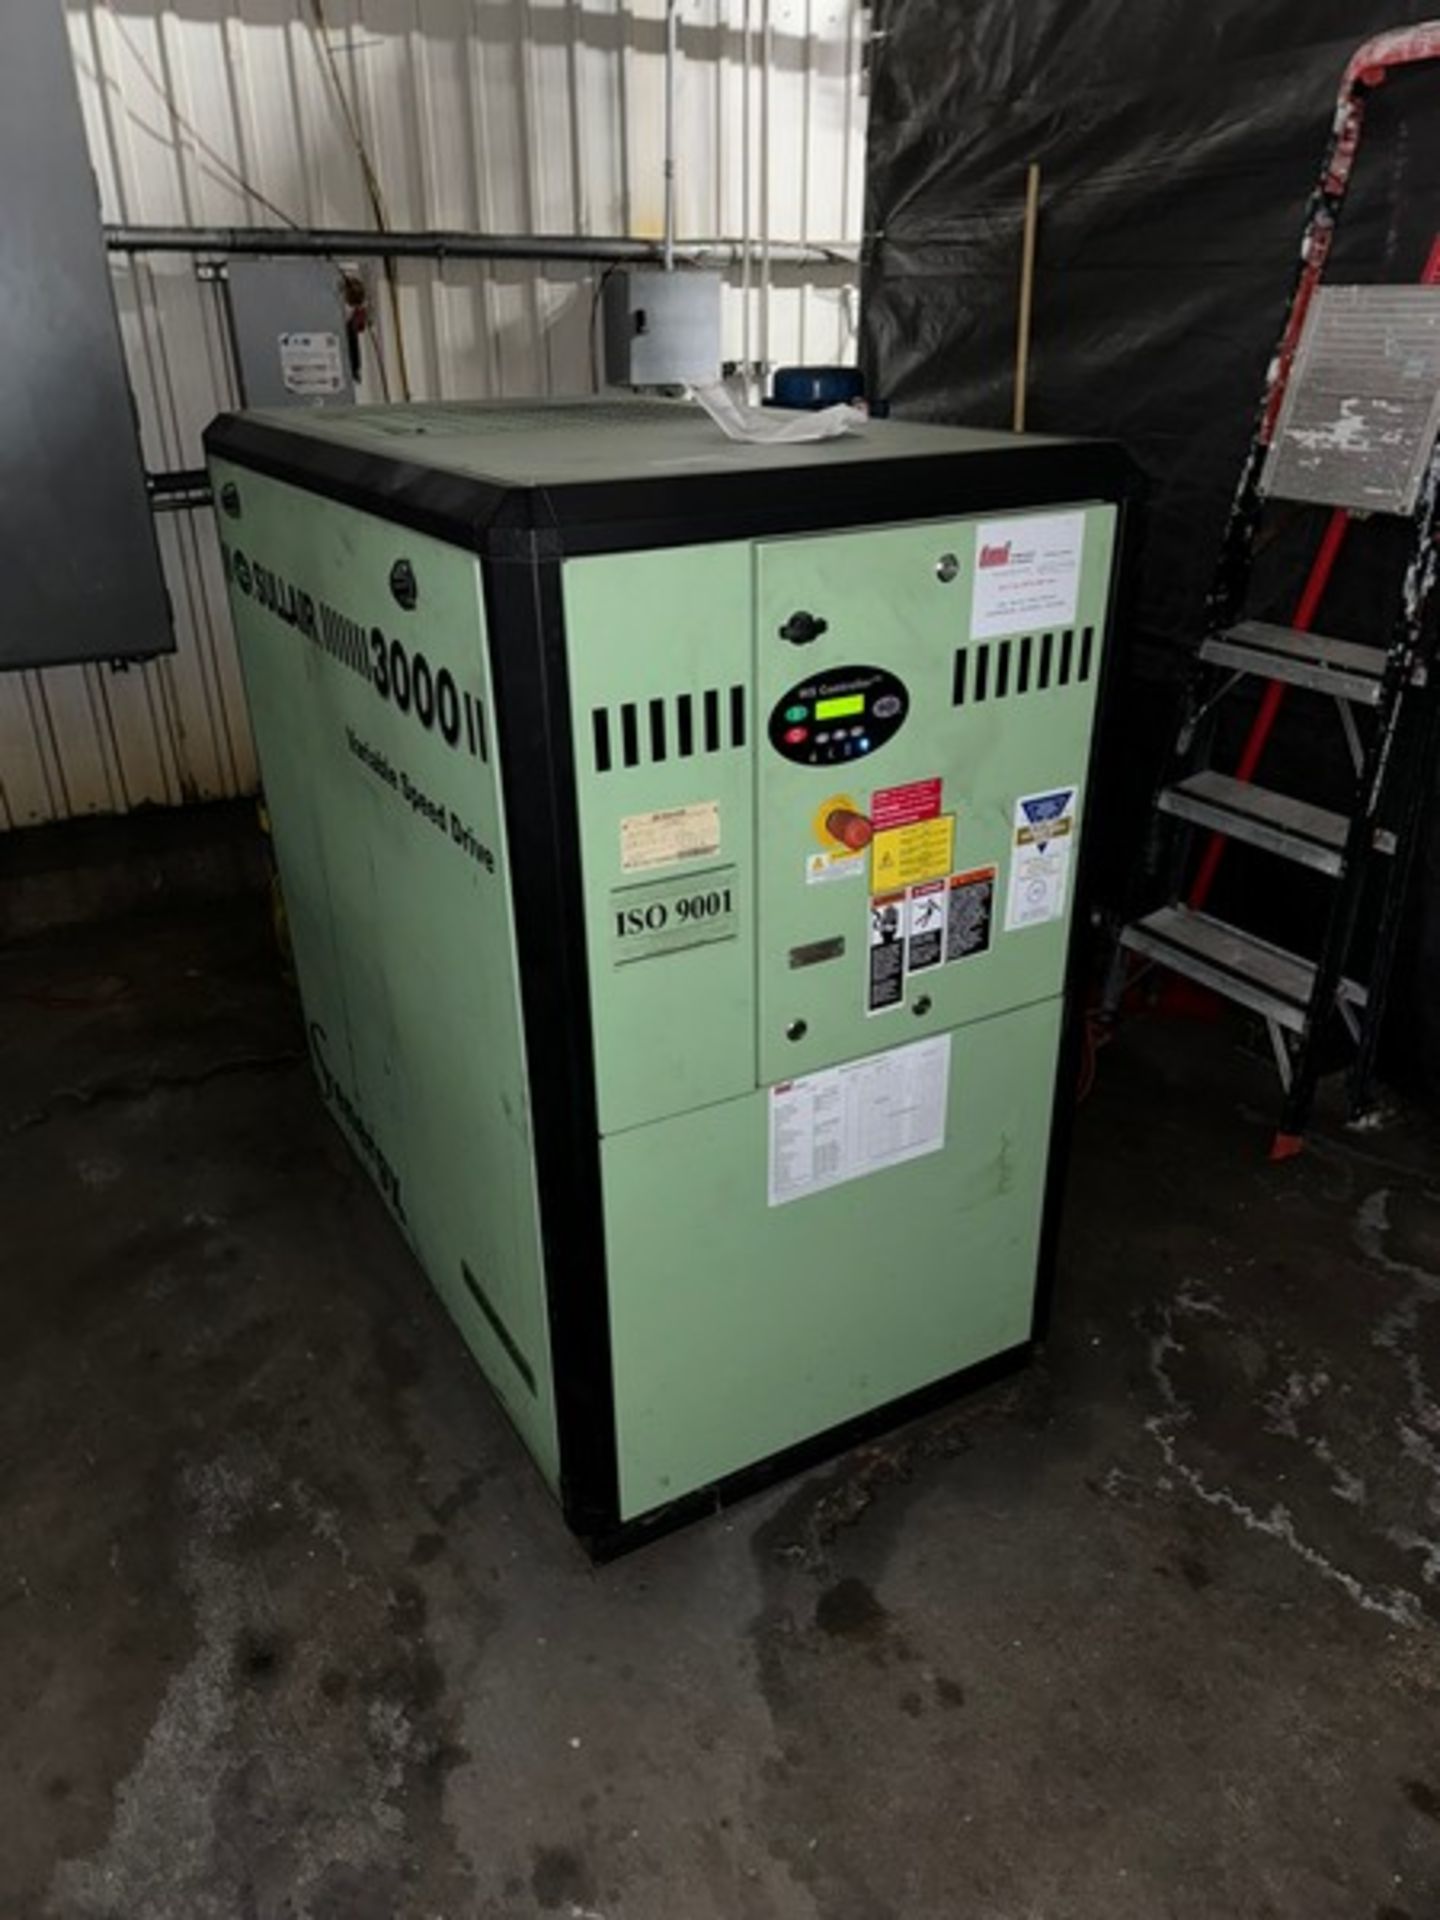 2014 Sullair Air Compressor, M/N 3009VD AC, S/N 201407160089, 125 PSI 167 CFM, with Integral Dryer - Image 2 of 6